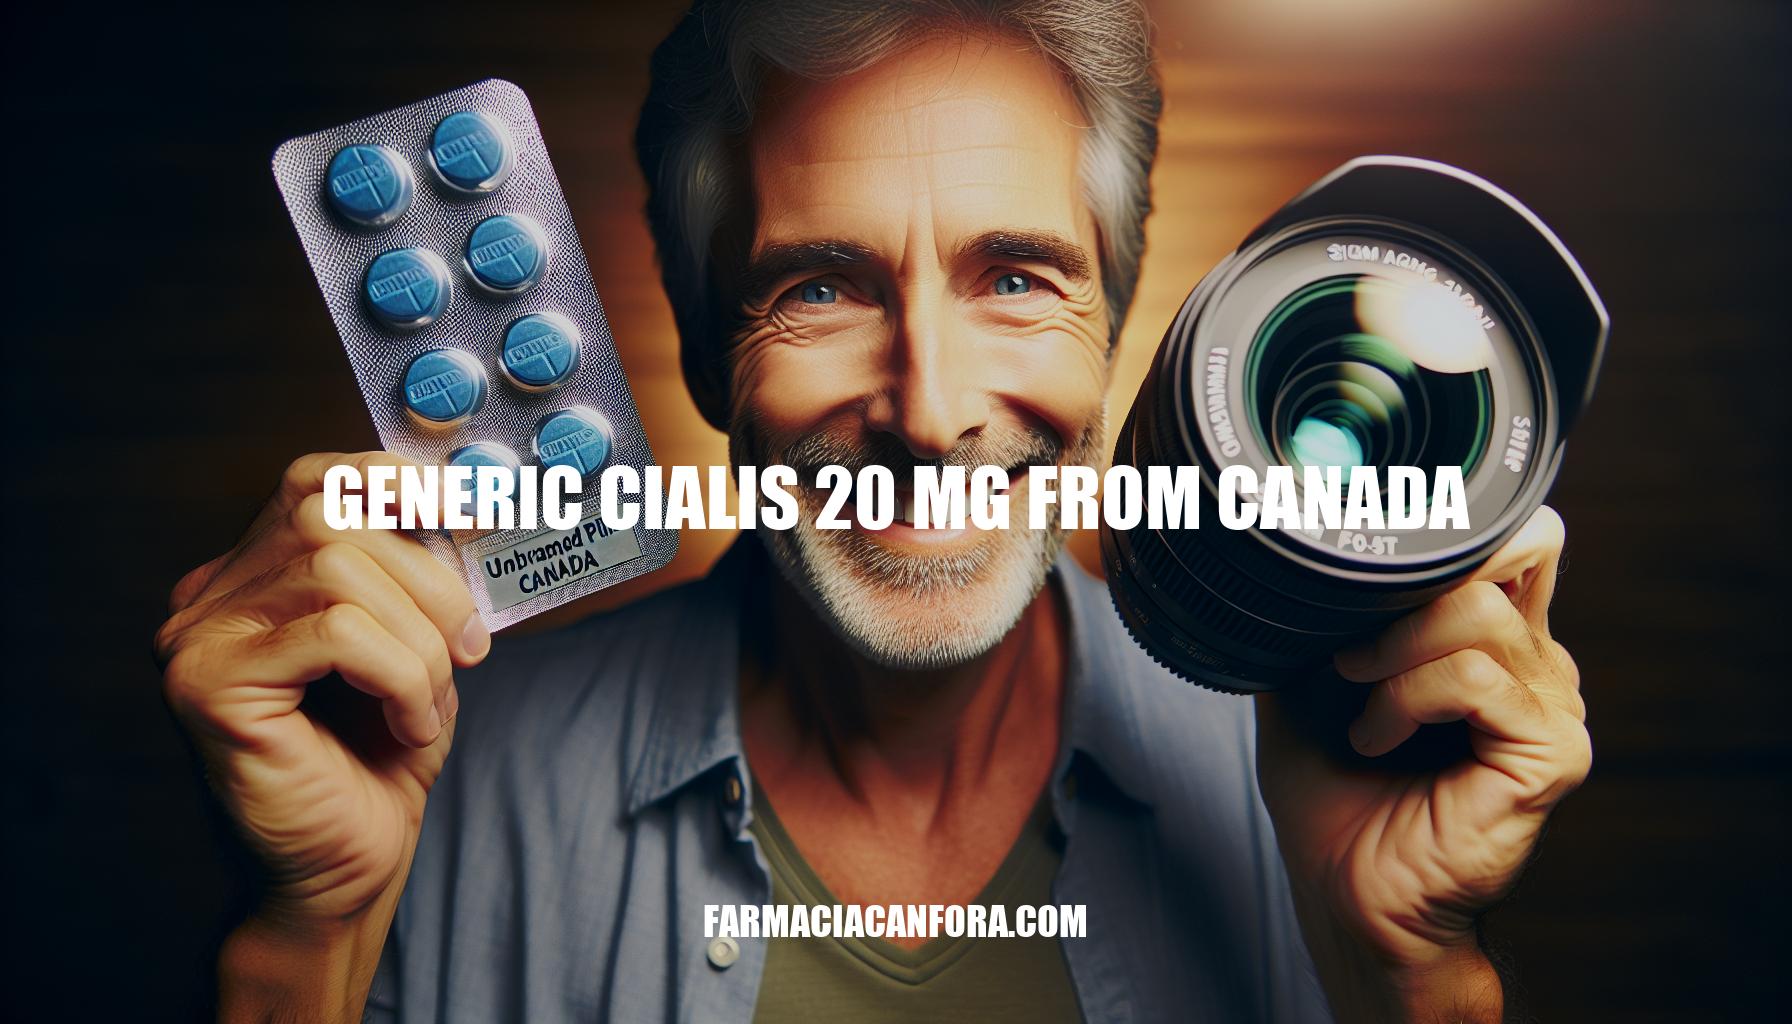 Generic Cialis 20 mg from Canada: Affordable ED Treatment Option